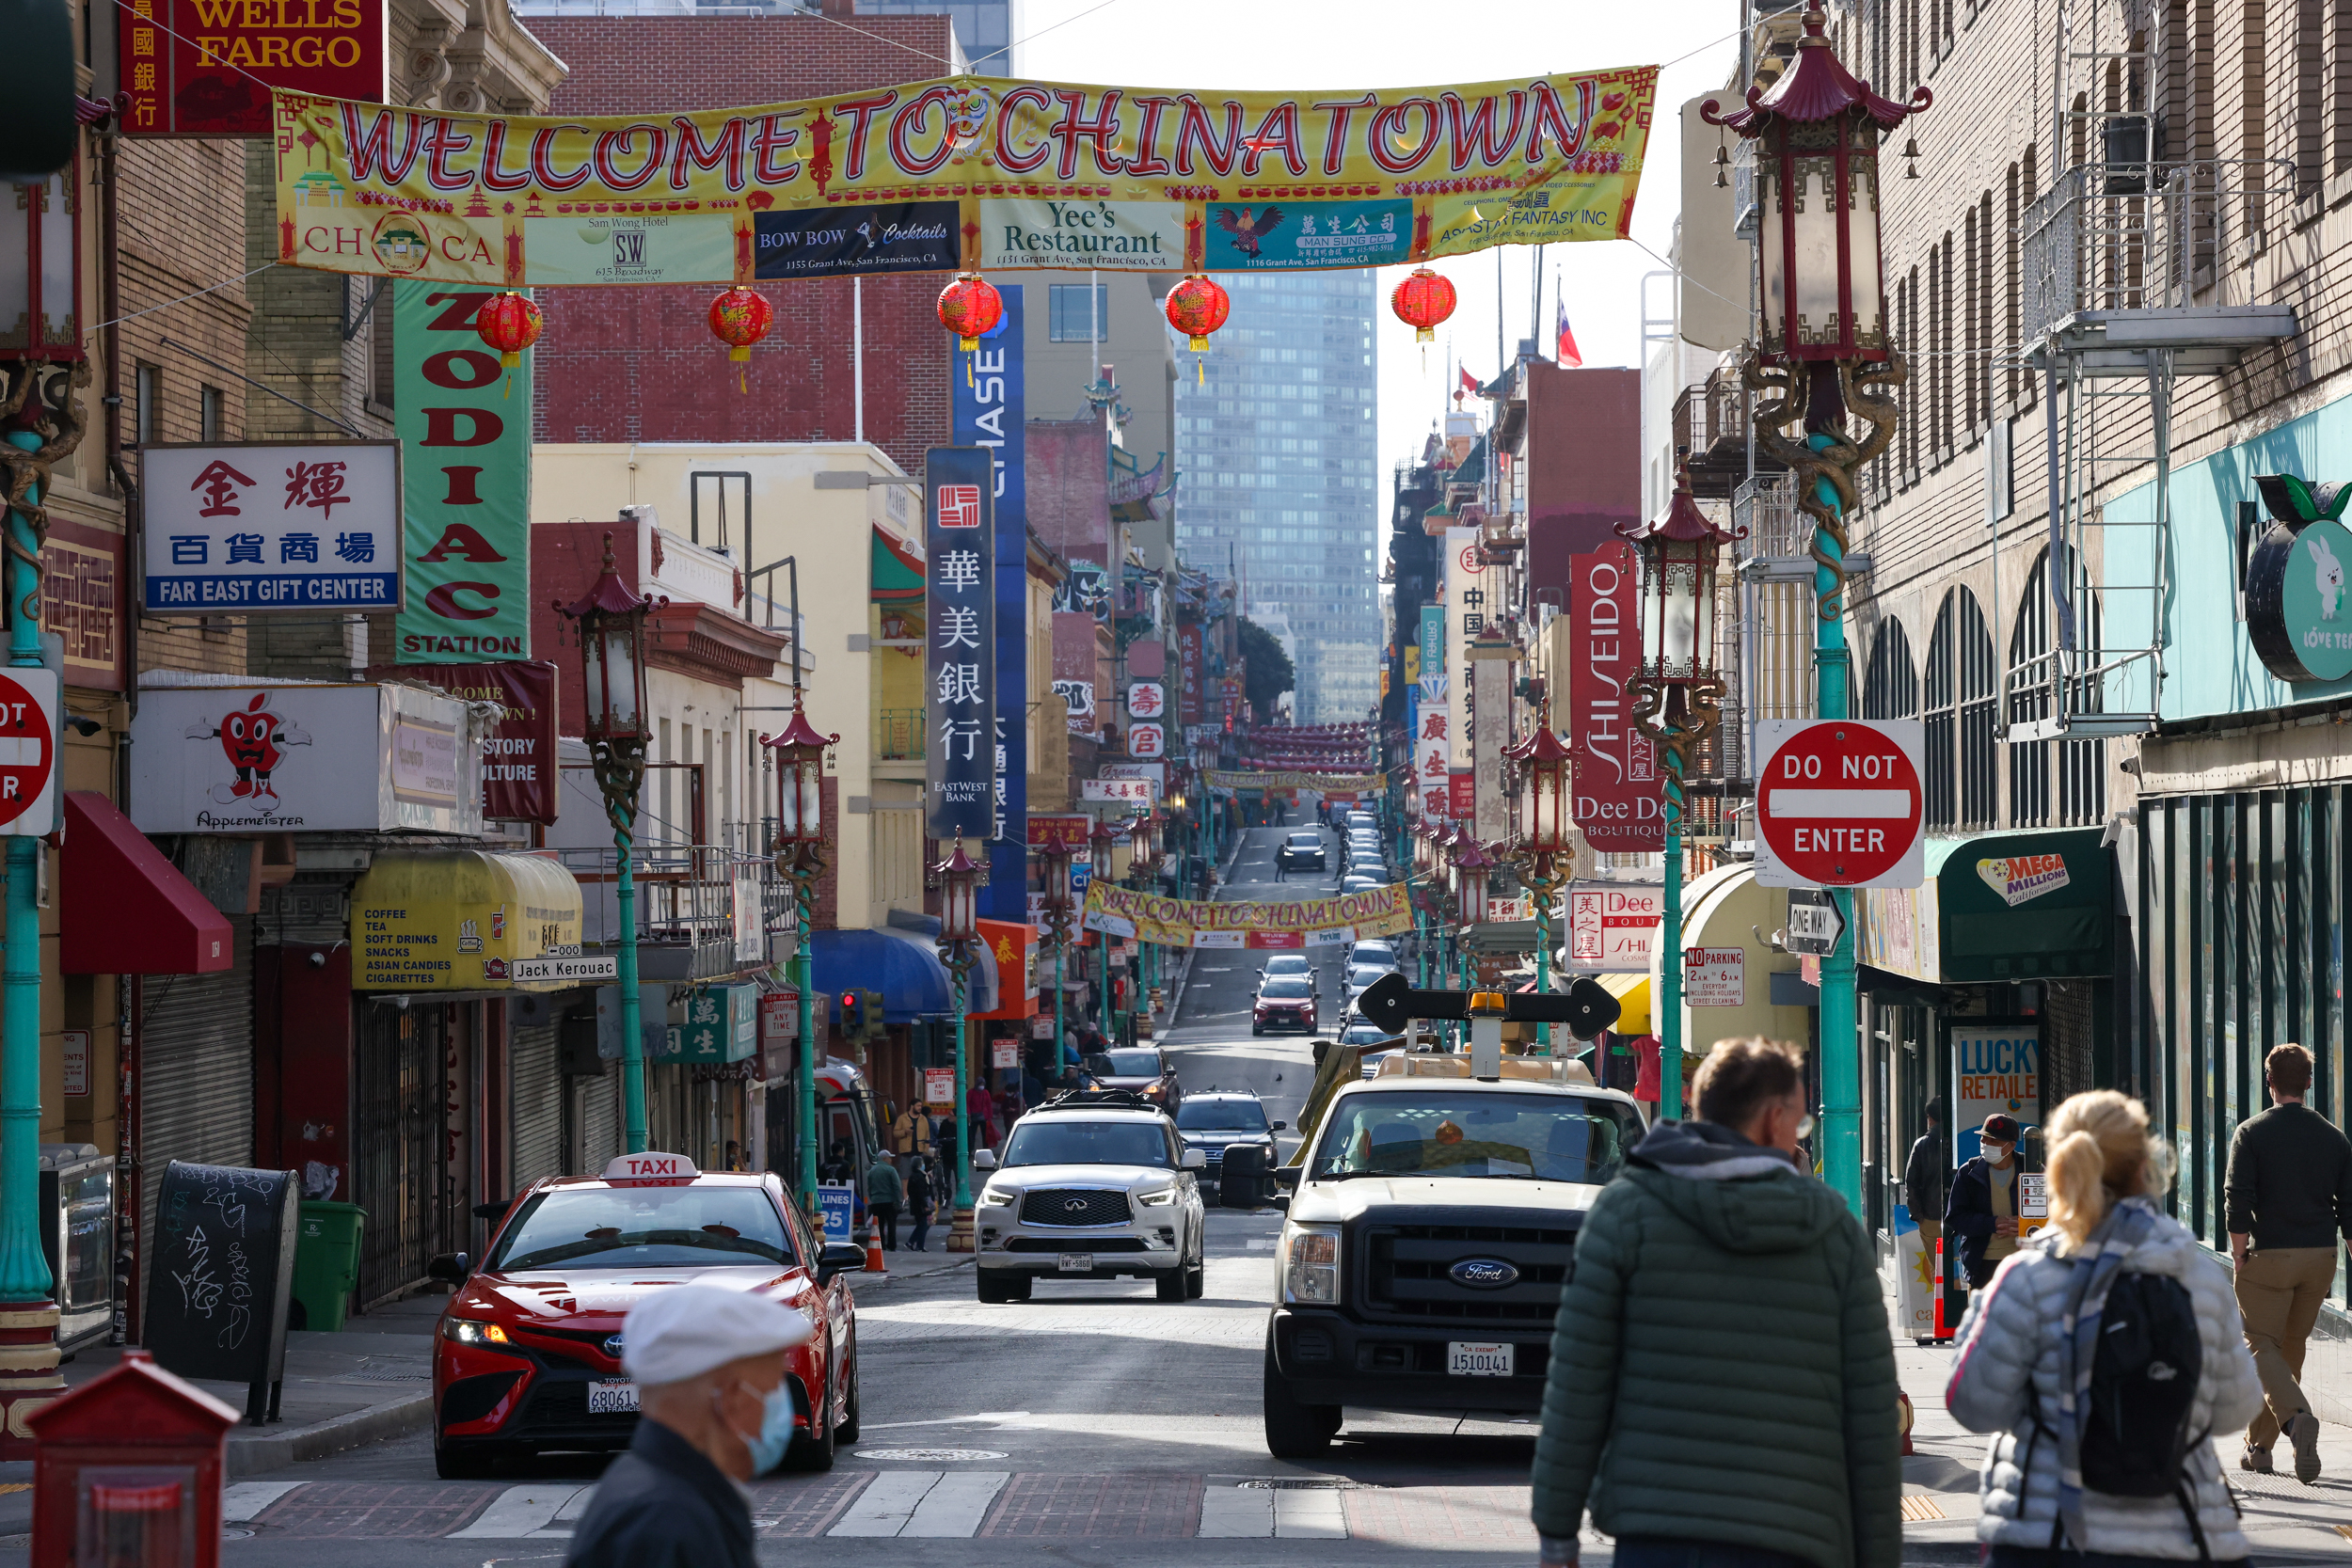 A bustling Chinatown street with a "Welcome" arch, adorned with lanterns, shops, pedestrians, and vehicles.